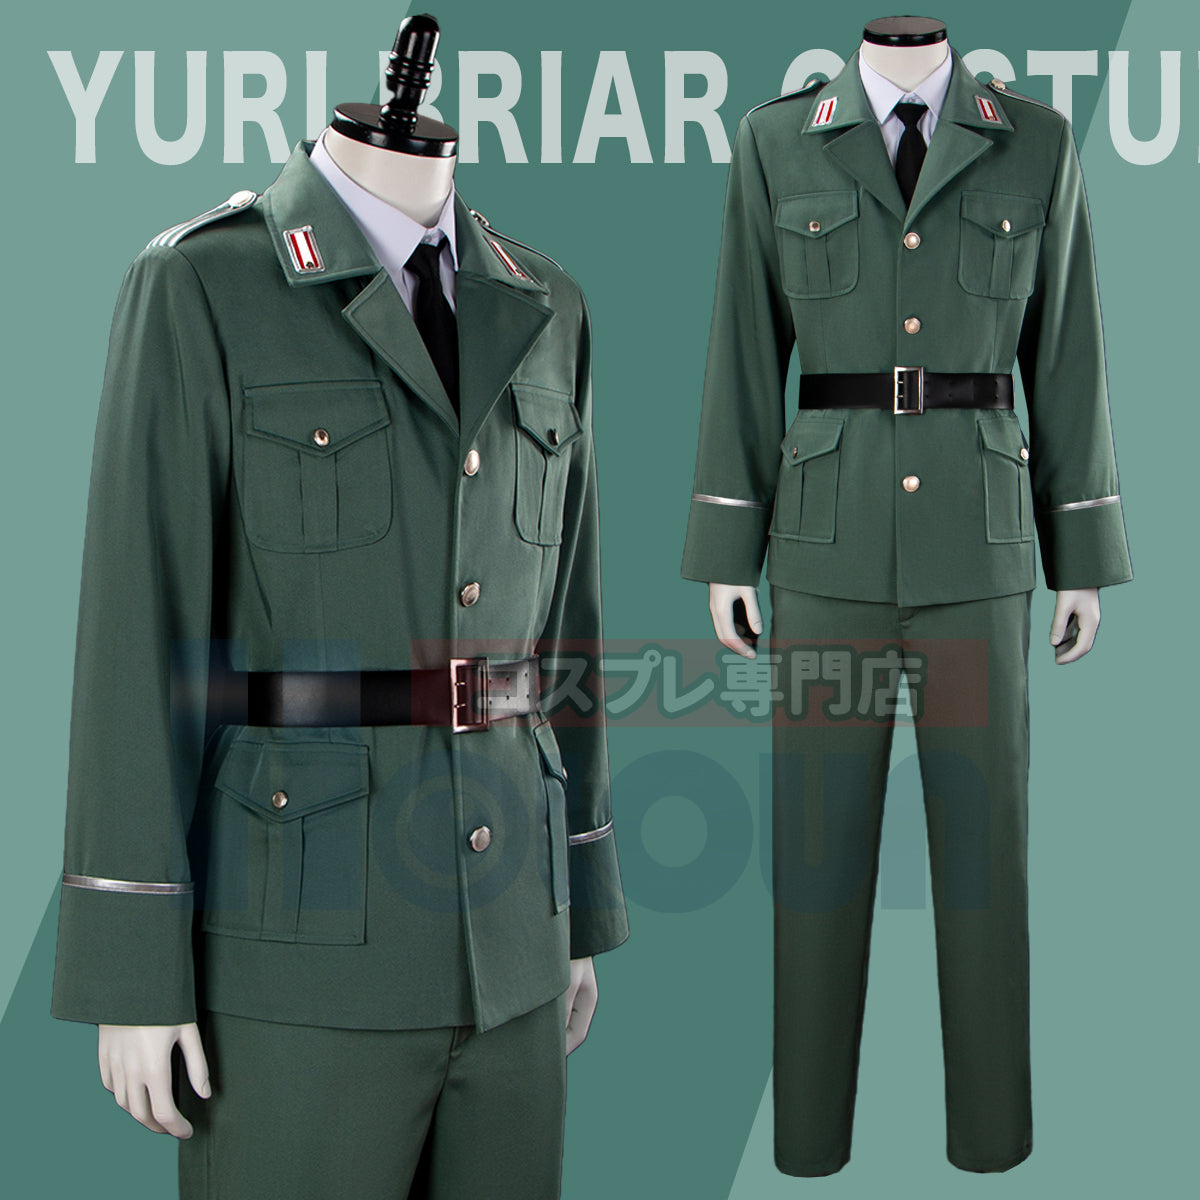 HOLOUN SPY FAMILY Yuri Briar Anime Cosplay Costumes Army Uniform With Hat Christmas Halloween Drag Party Holiday Gift 6PCS Set New Arrival